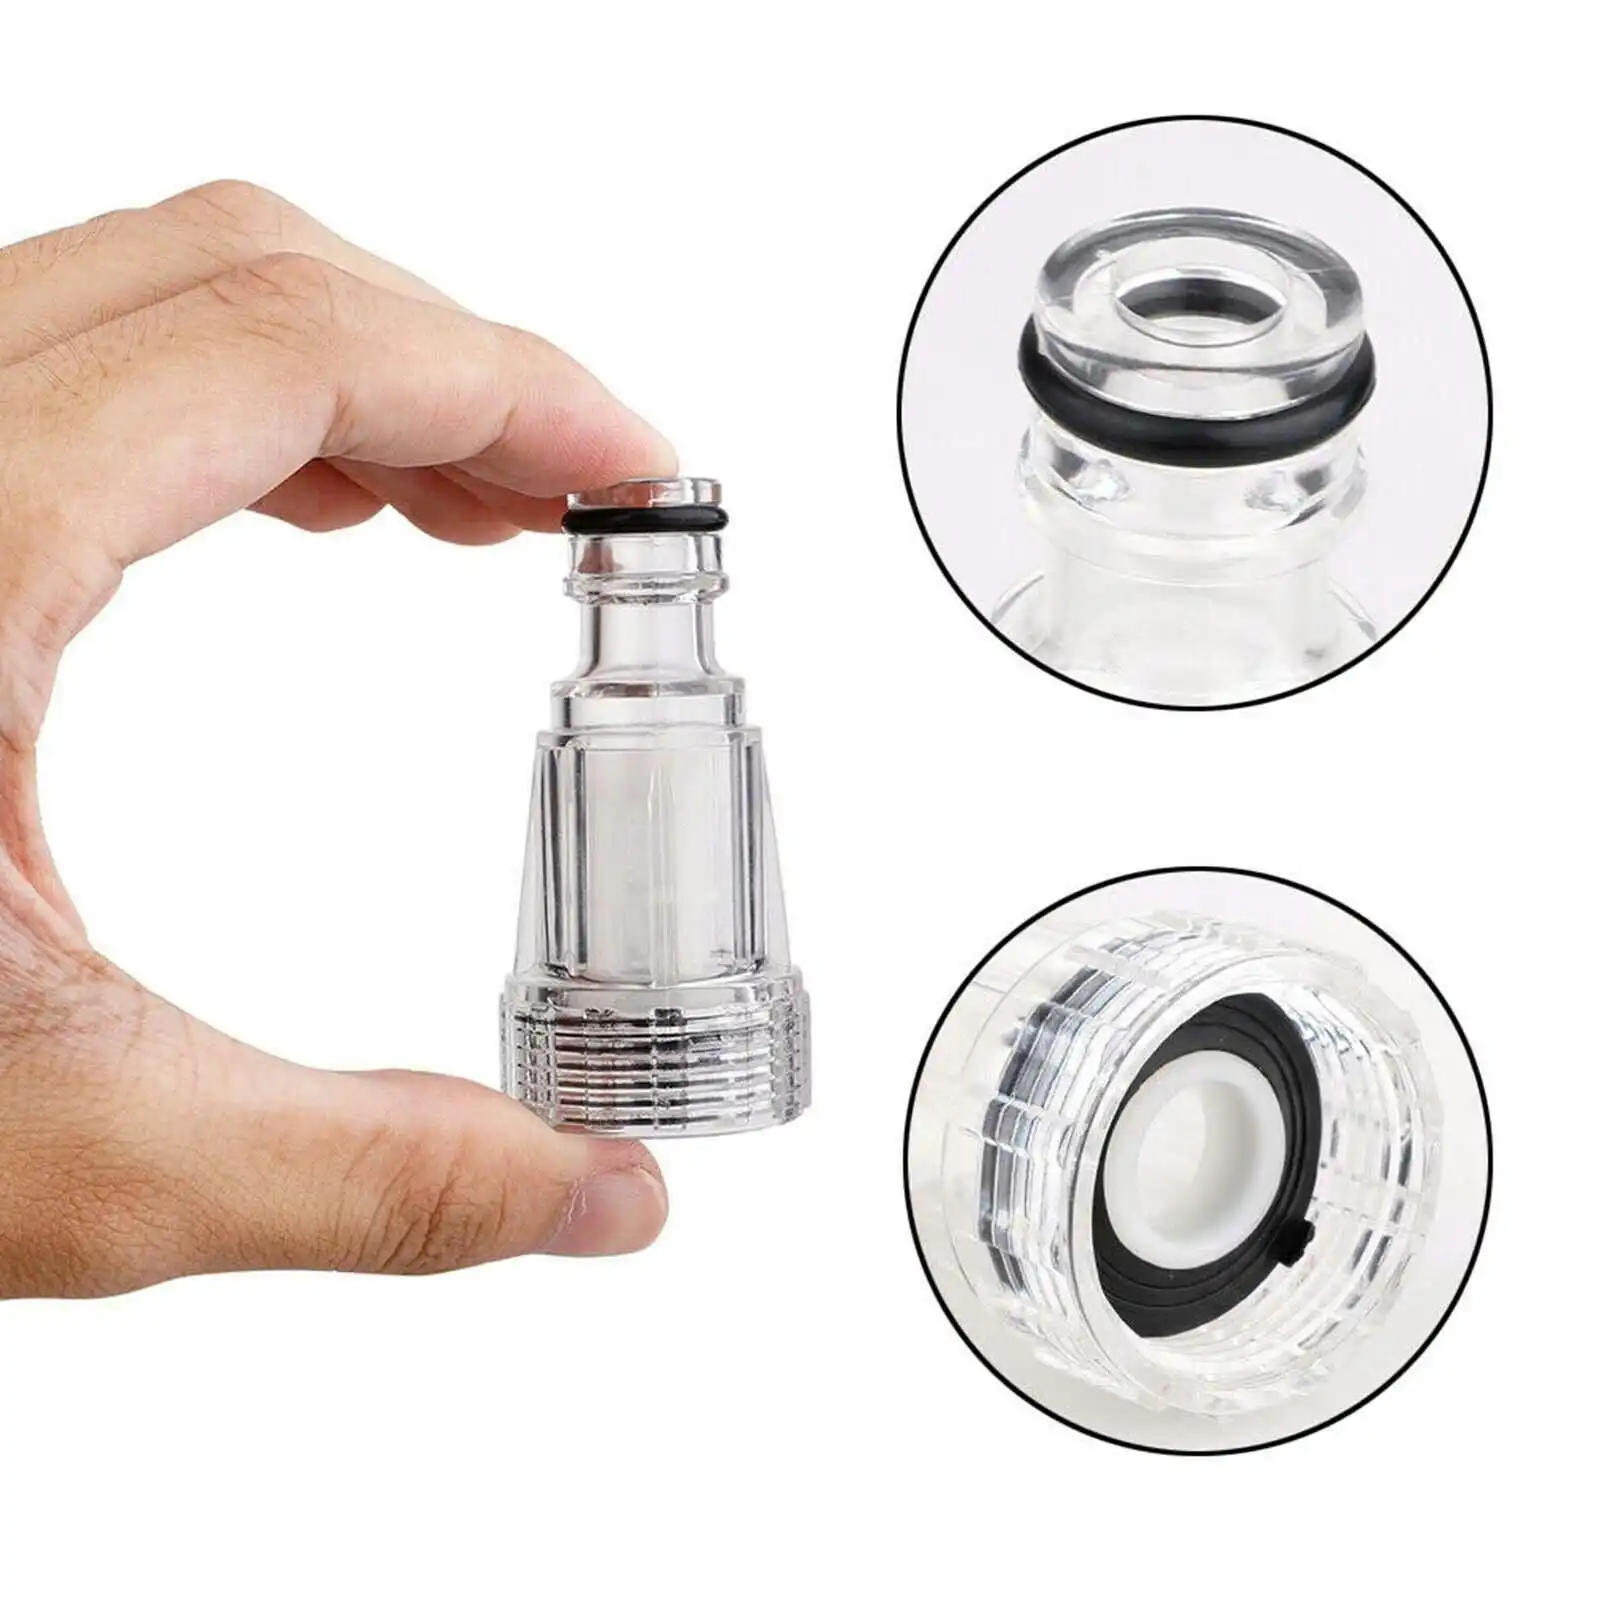 2PCS High-Pressure Car Clean Washer Water Filter Connection Fitting Tool Set